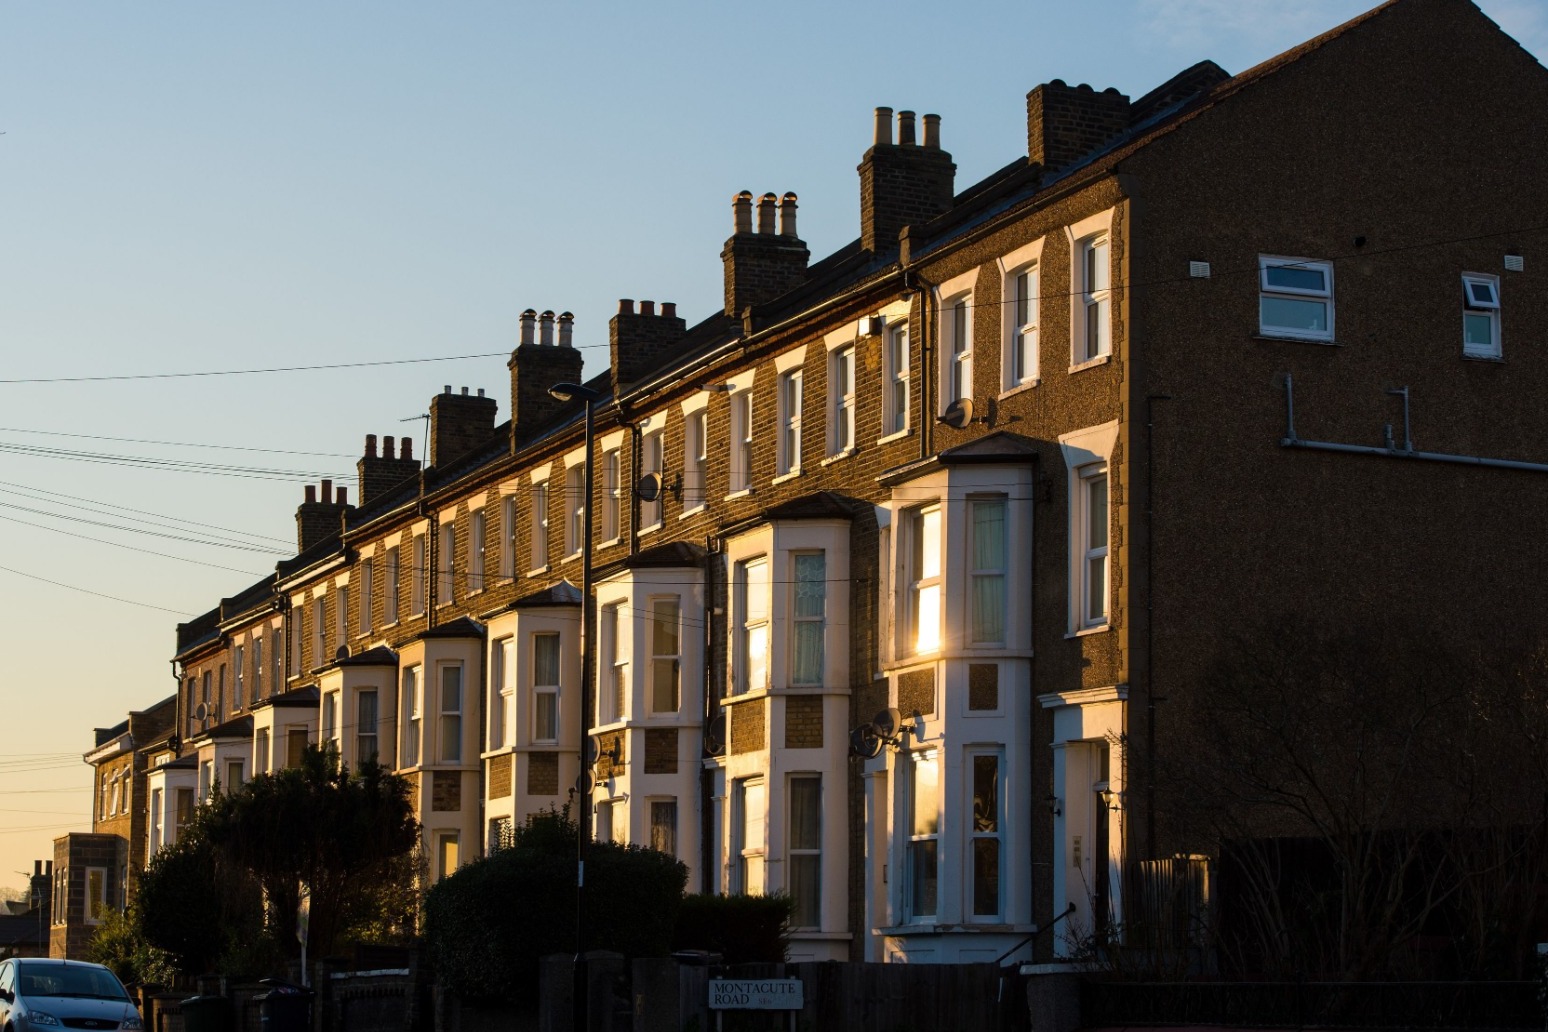 House prices rise by 0.4% as property market picks up 